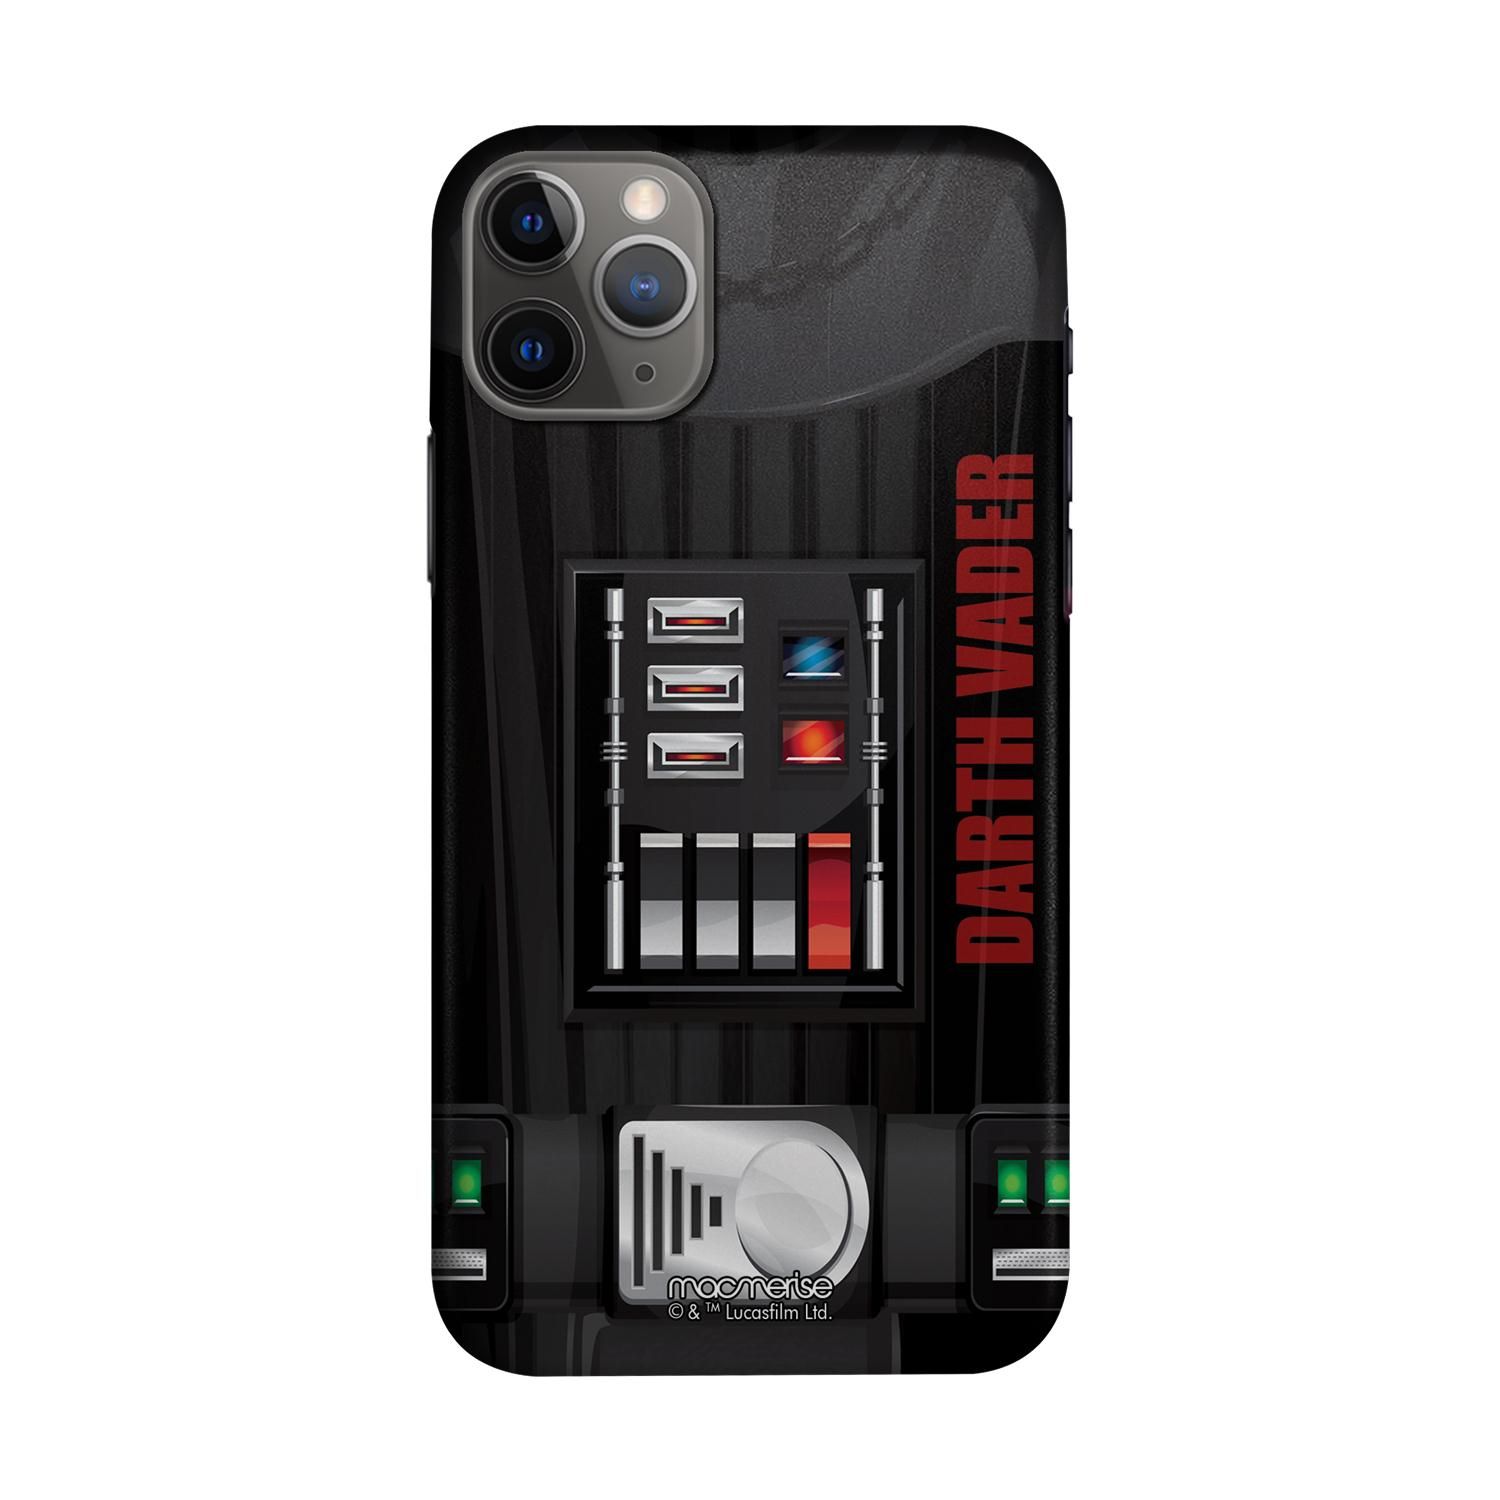 Buy Attire Vader - Sleek Phone Case for iPhone 11 Pro Max Online